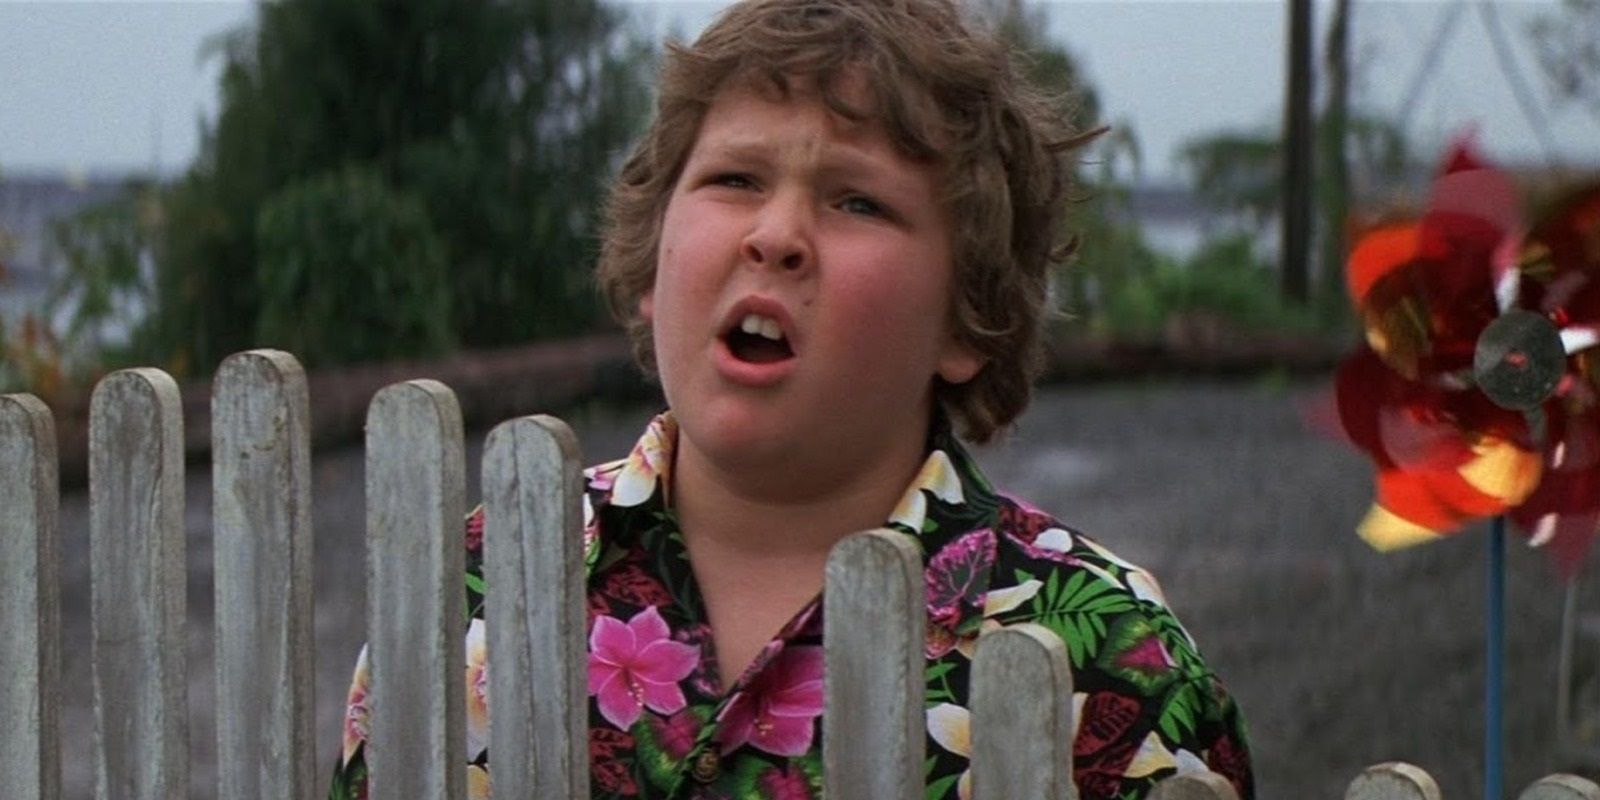 Chunk standing by a fence in The Goonies